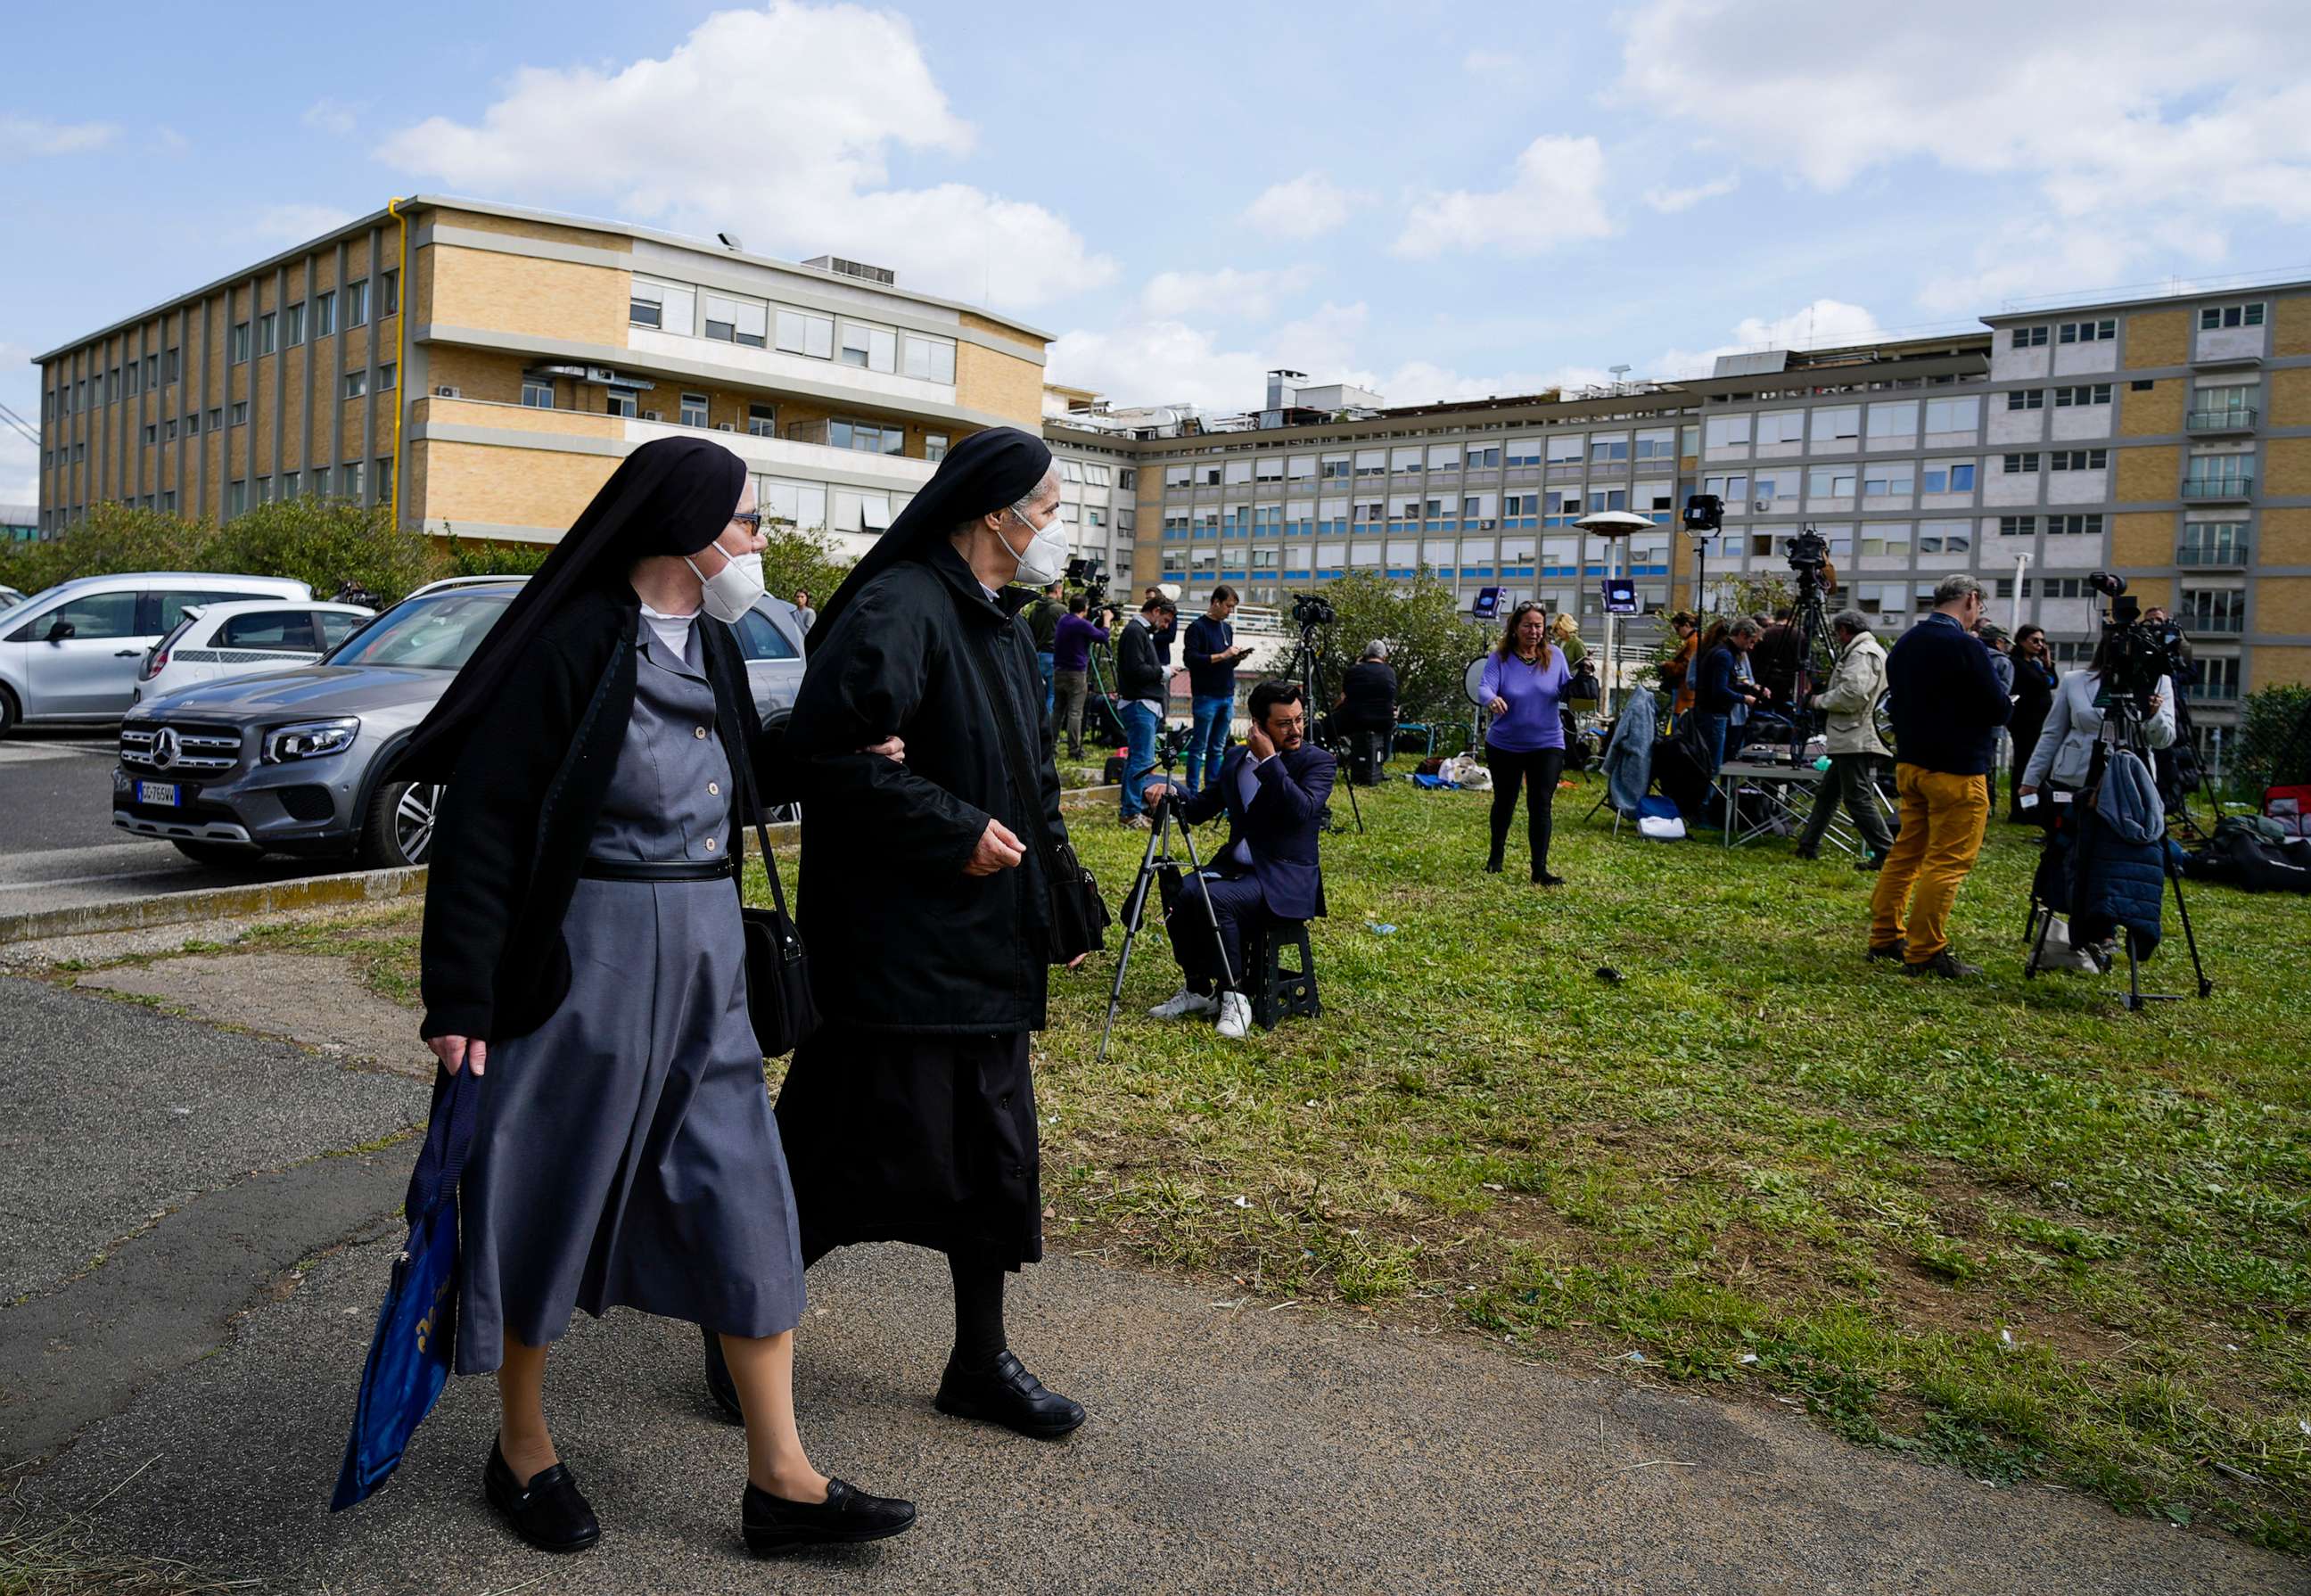 PHOTO: Two nuns walk by the Agostino Gemelli University Hospital in Rome, March 30, 2023, where Pope Francis was admitted on Wednesday after having suffered breathing problems in recent days and was diagnosed with a respiratory infection.